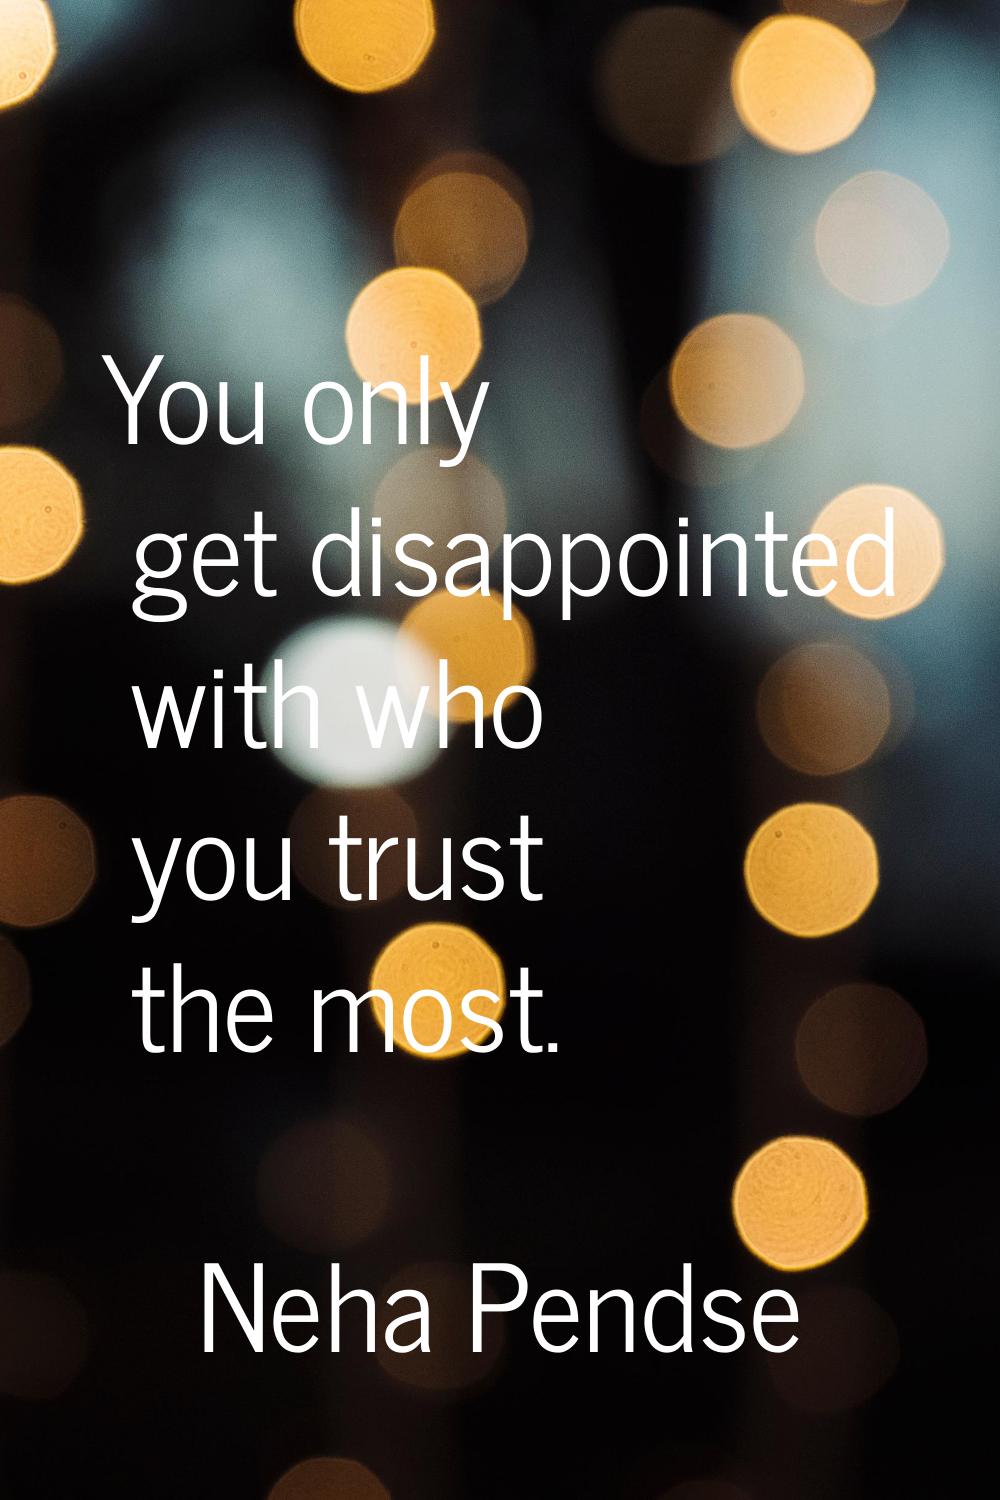 You only get disappointed with who you trust the most.